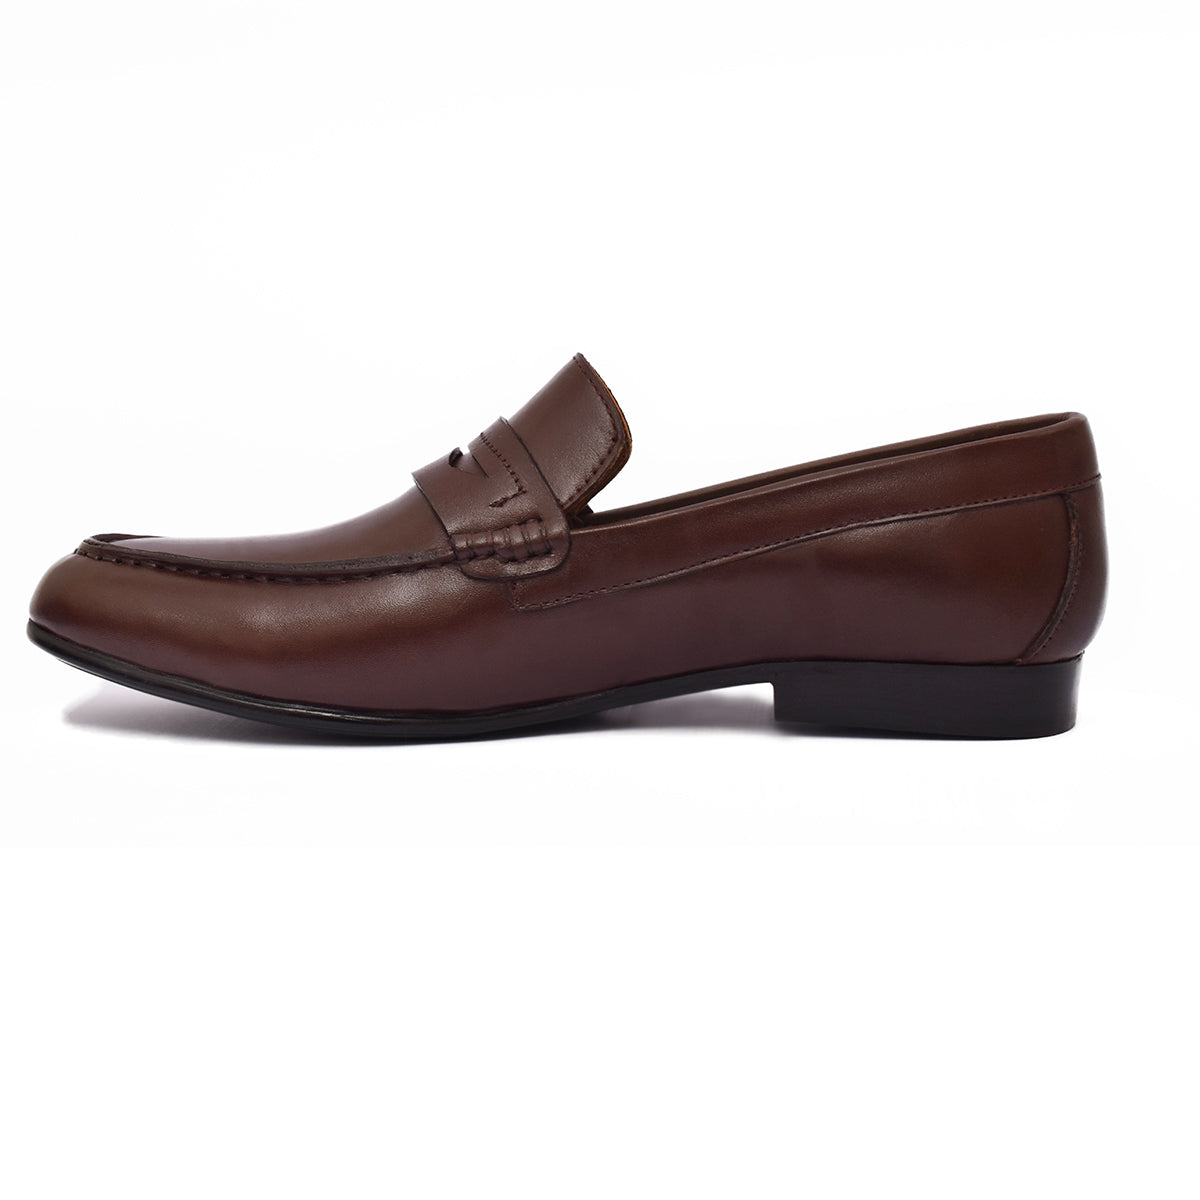 Johny Weber Handmade Brown Leather Loafers Shoes